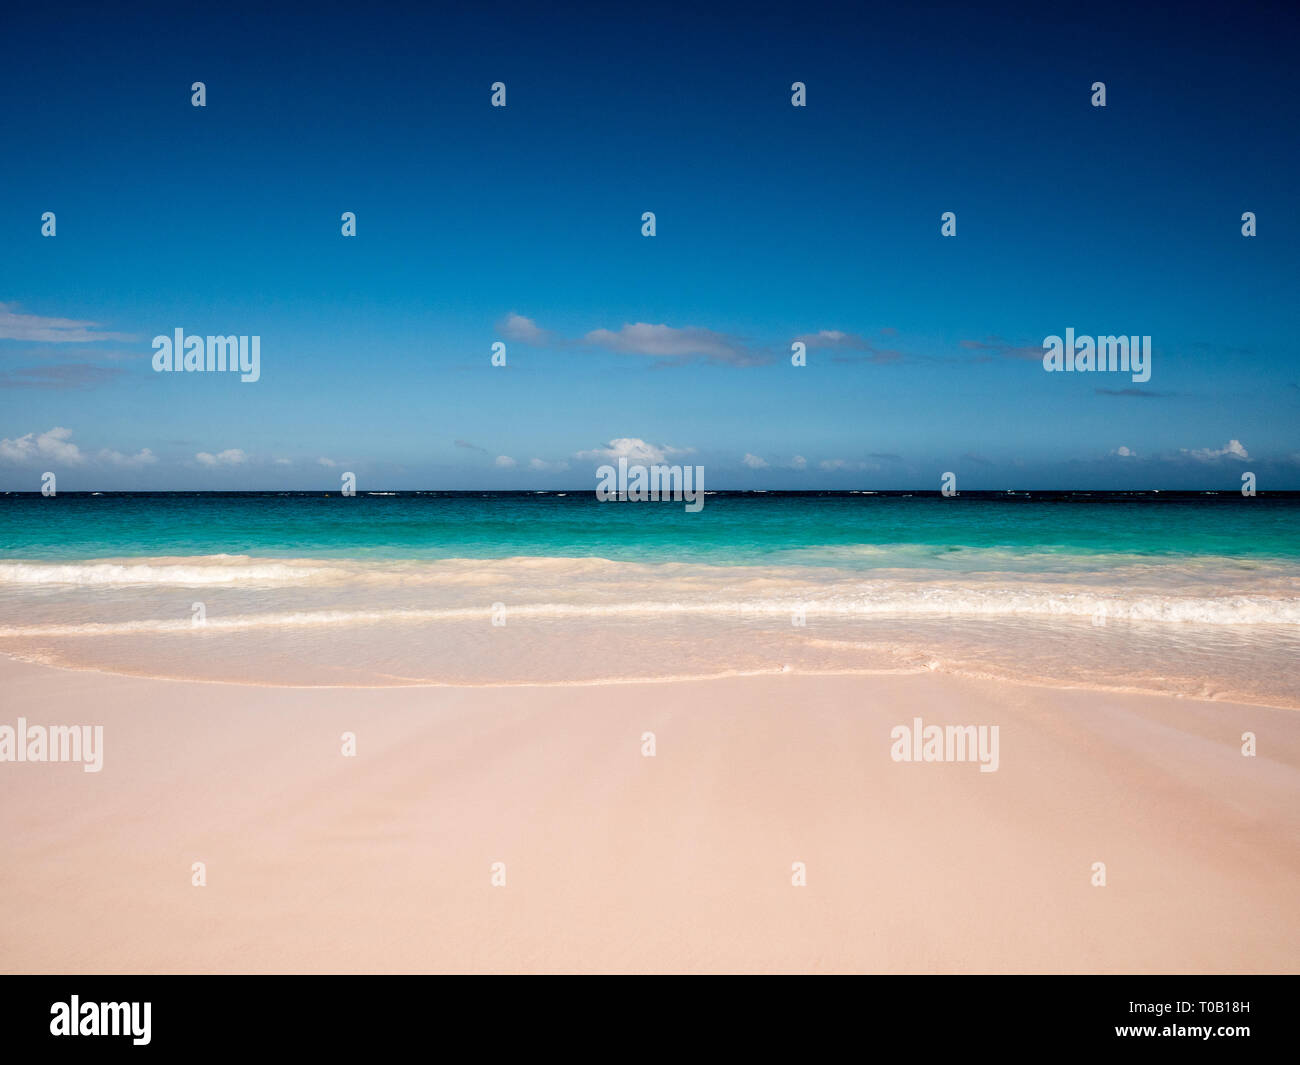 Landscape of Tropical Beach, Pink Sands Beach, Dunmore Town, Harbour Island, Eleuthera, The Bahamas, The Caribbean. Stock Photo